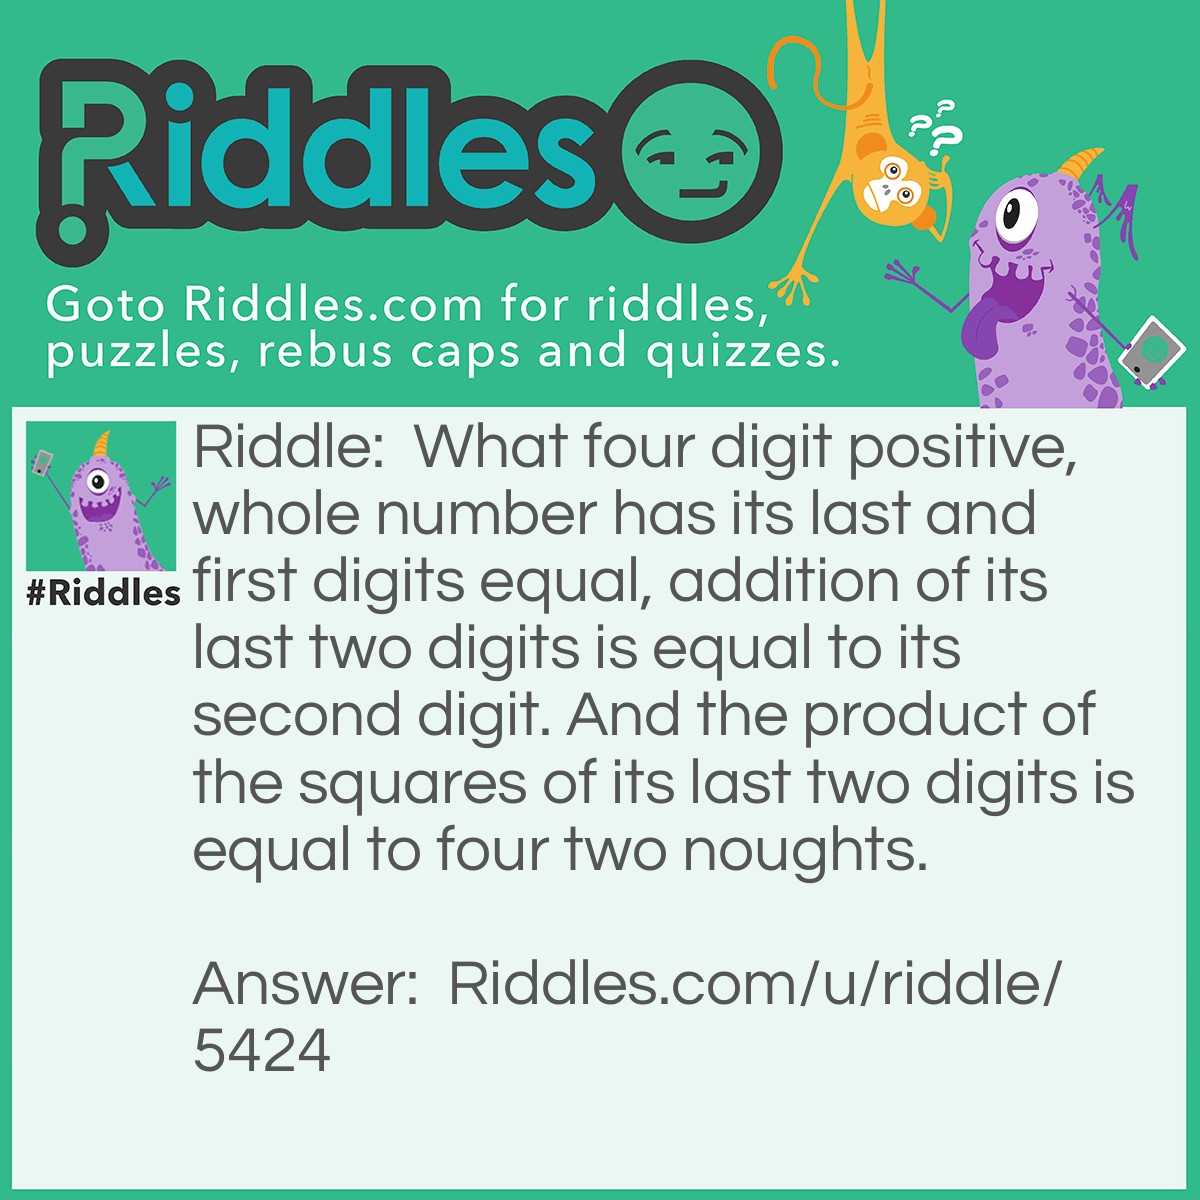 Riddle: What four digit positive, whole number has its last and first digits equal, addition of its last two digits is equal to its second digit. And the product of the squares of its last two digits is equal to four two noughts. Answer: 5945. 5=5. 4+5=9=second digit 4^2 x 5^2 = 400 = four two noughts